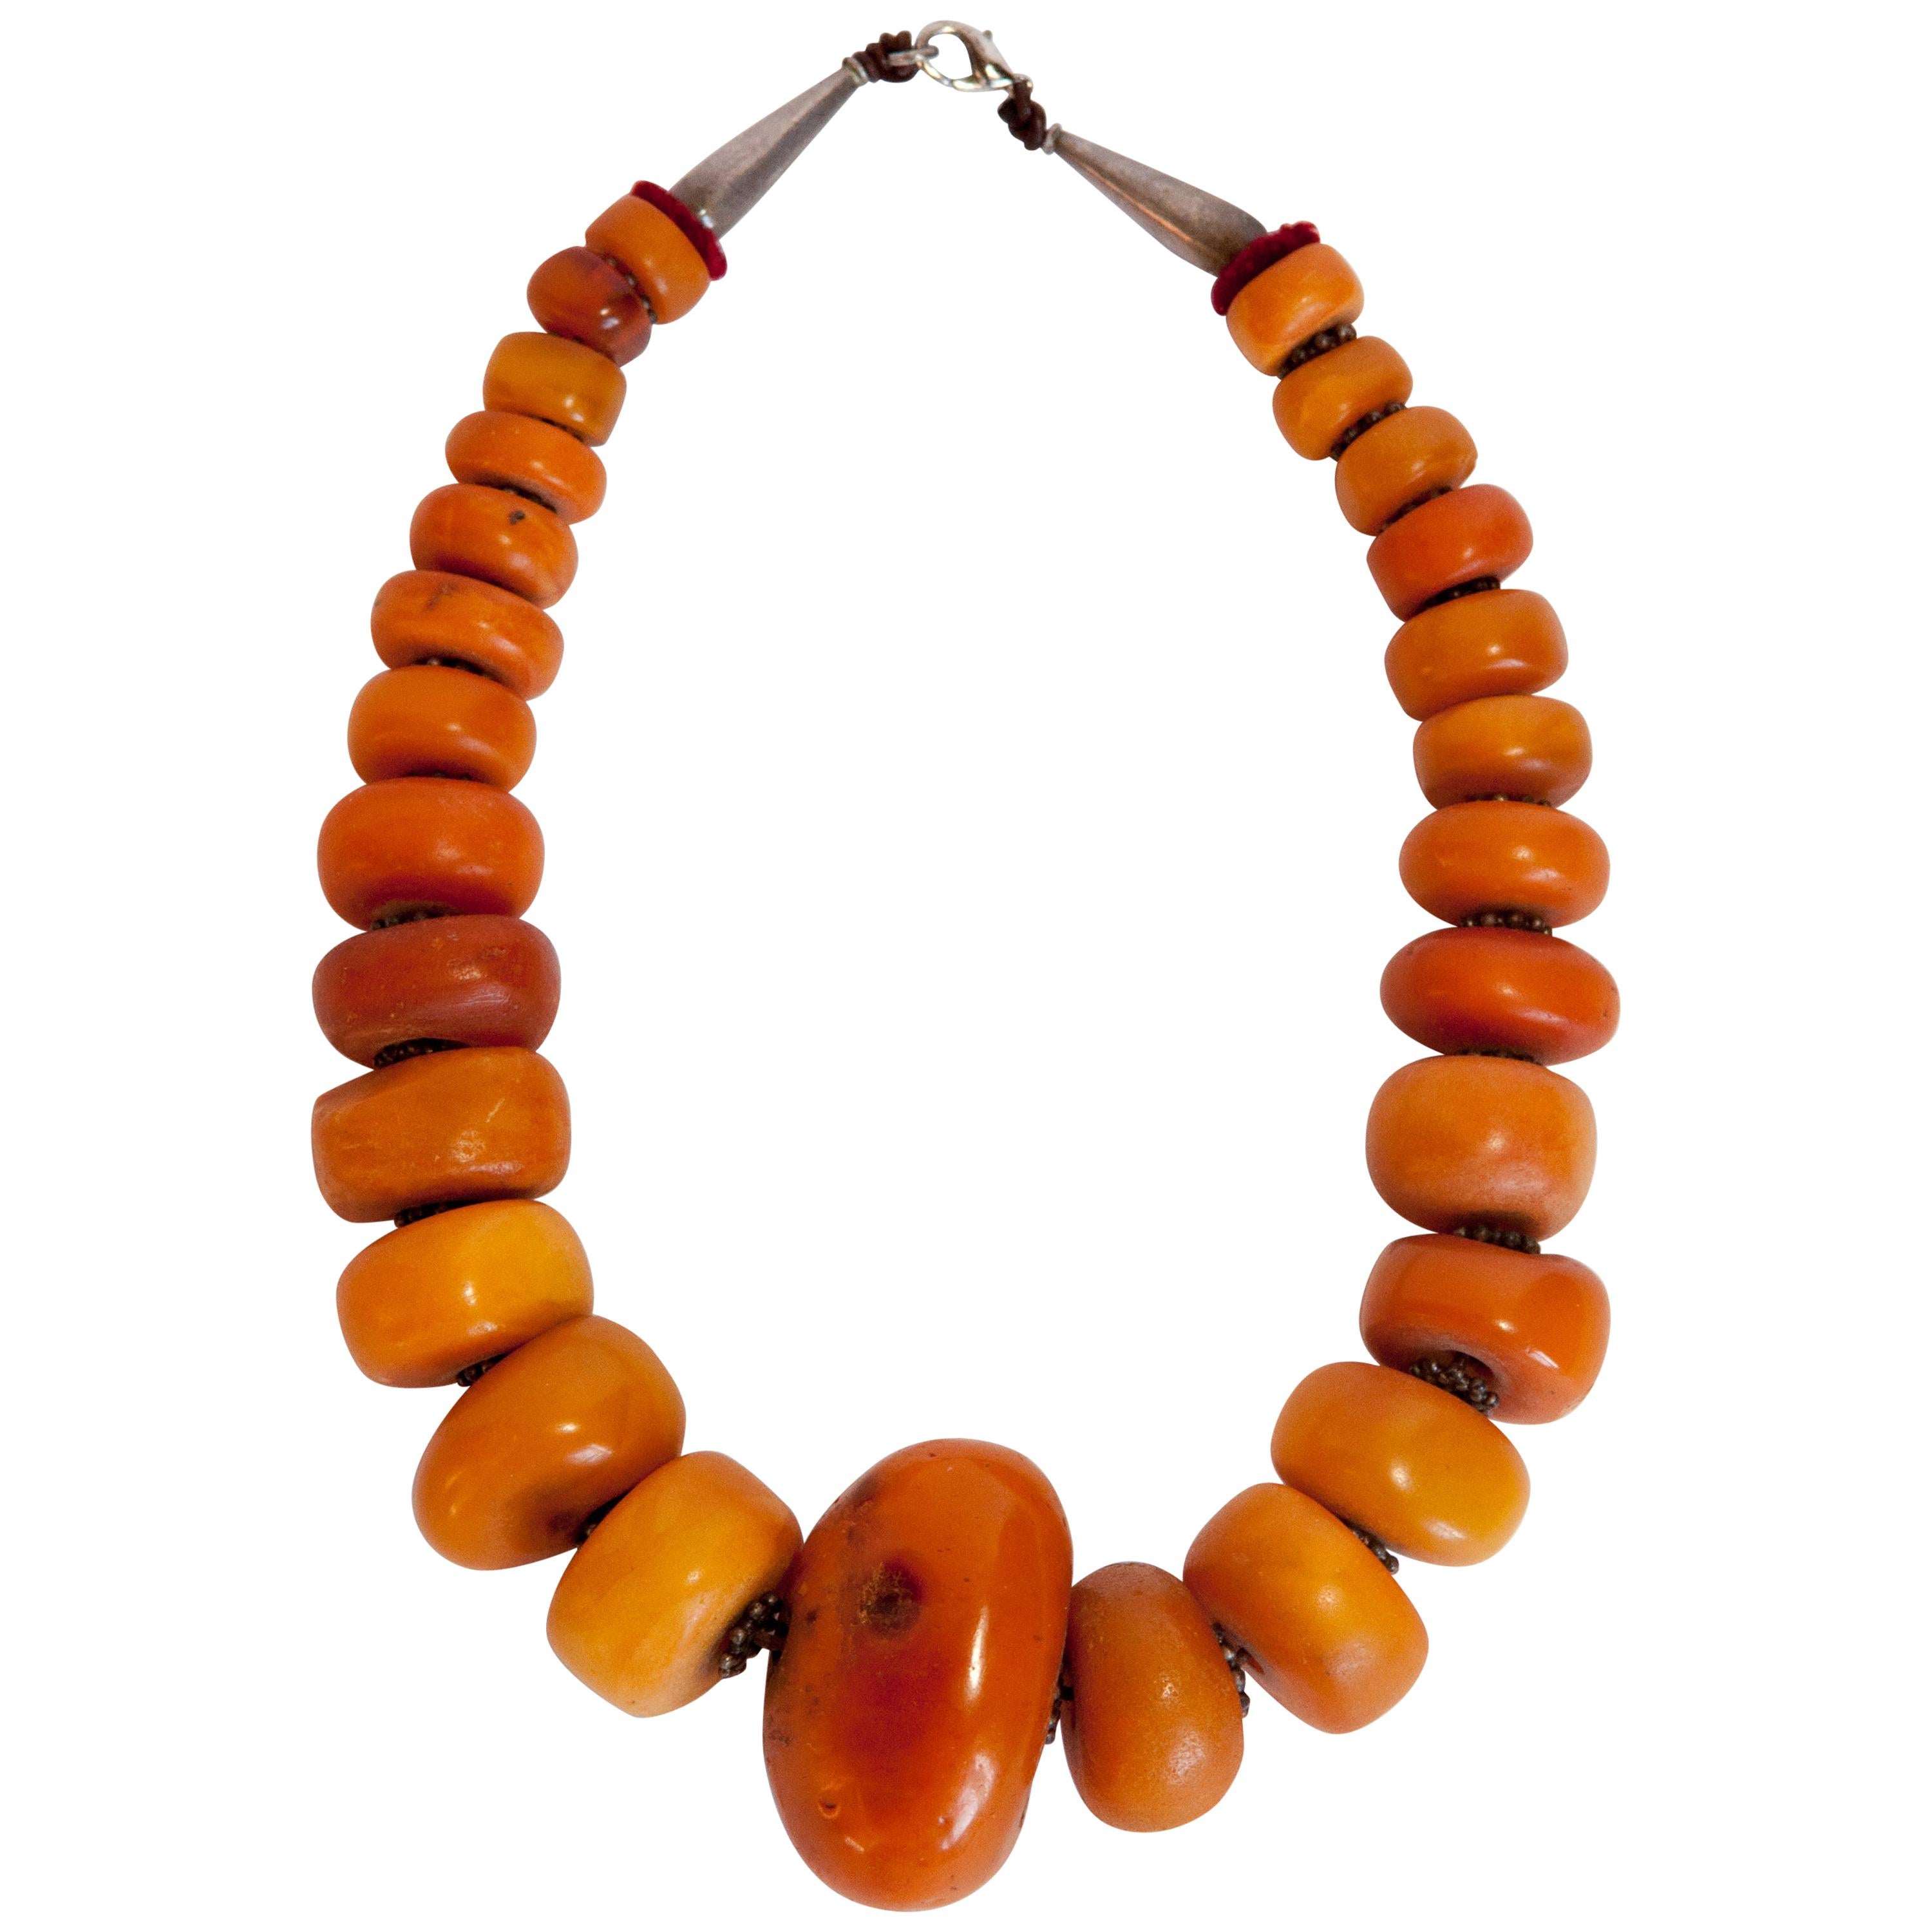 Necklace Strung with Antique Tibetan Amber Beads